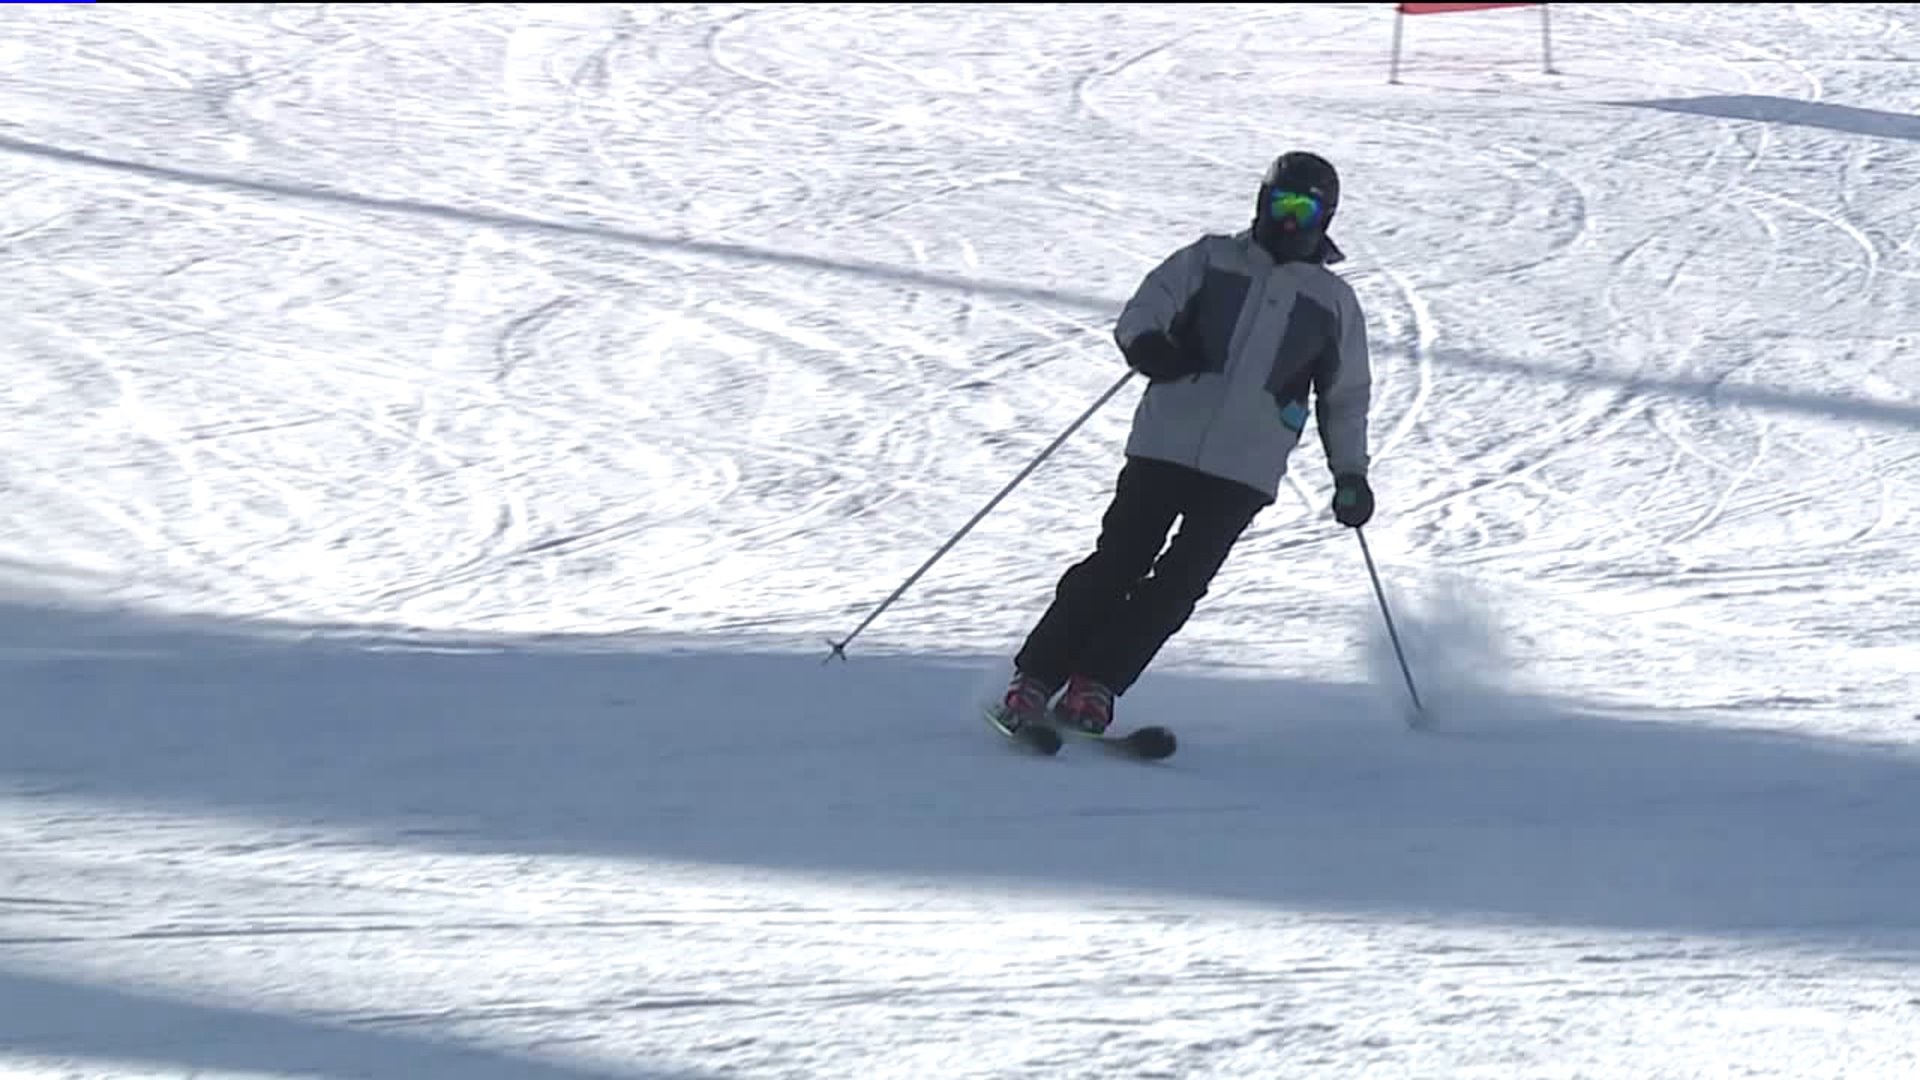 Cold Forces Ski Resorts to Close Early